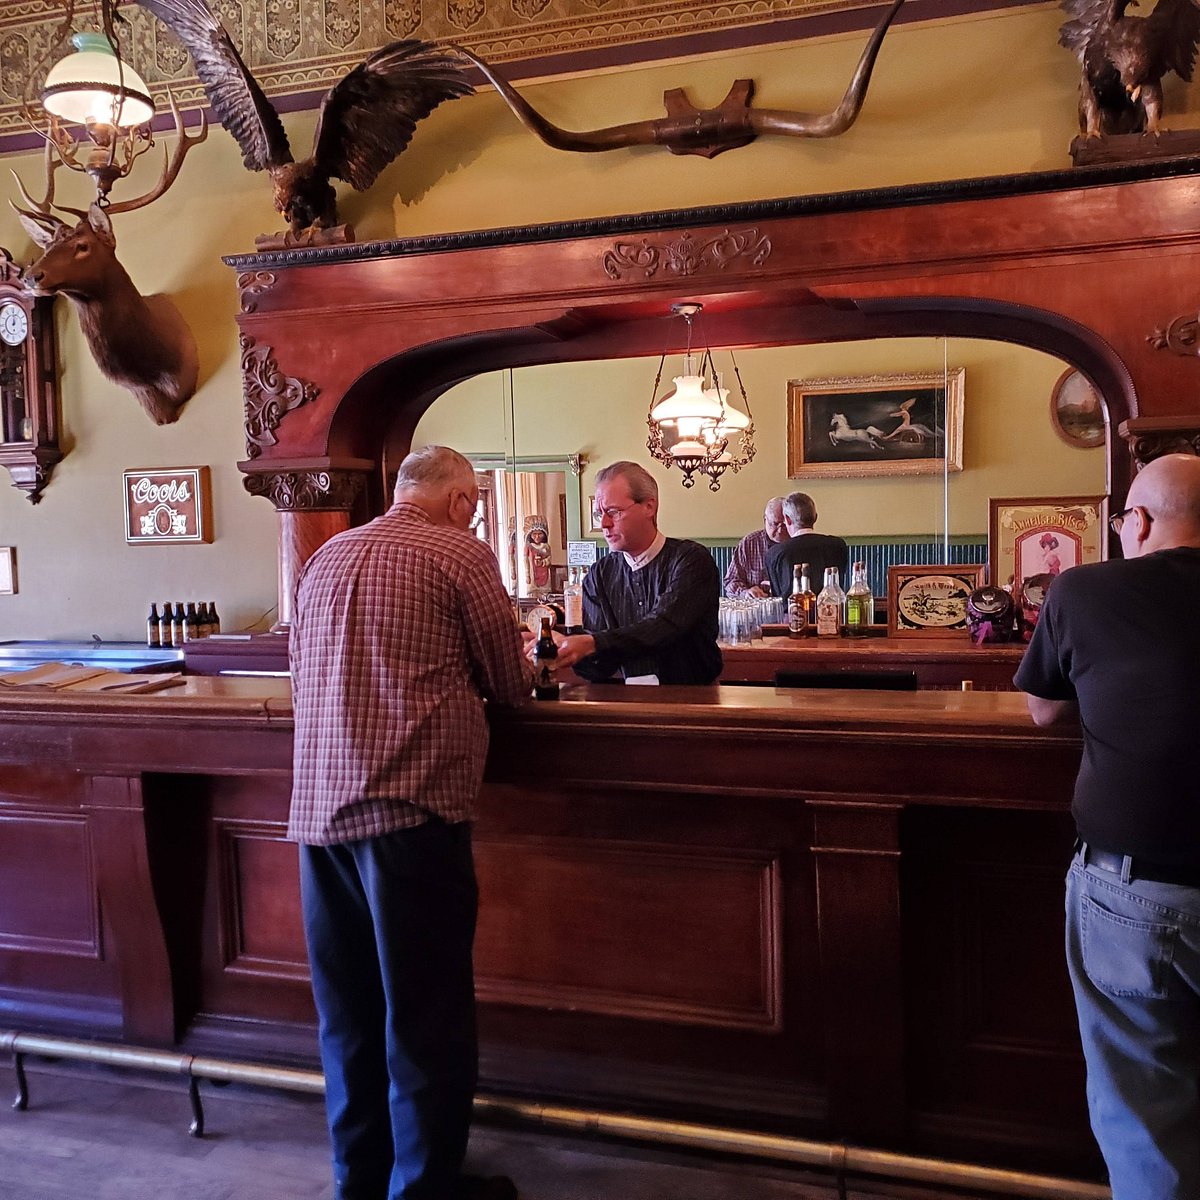 Explore the Historic Long Branch Saloon in Knoxville, TN